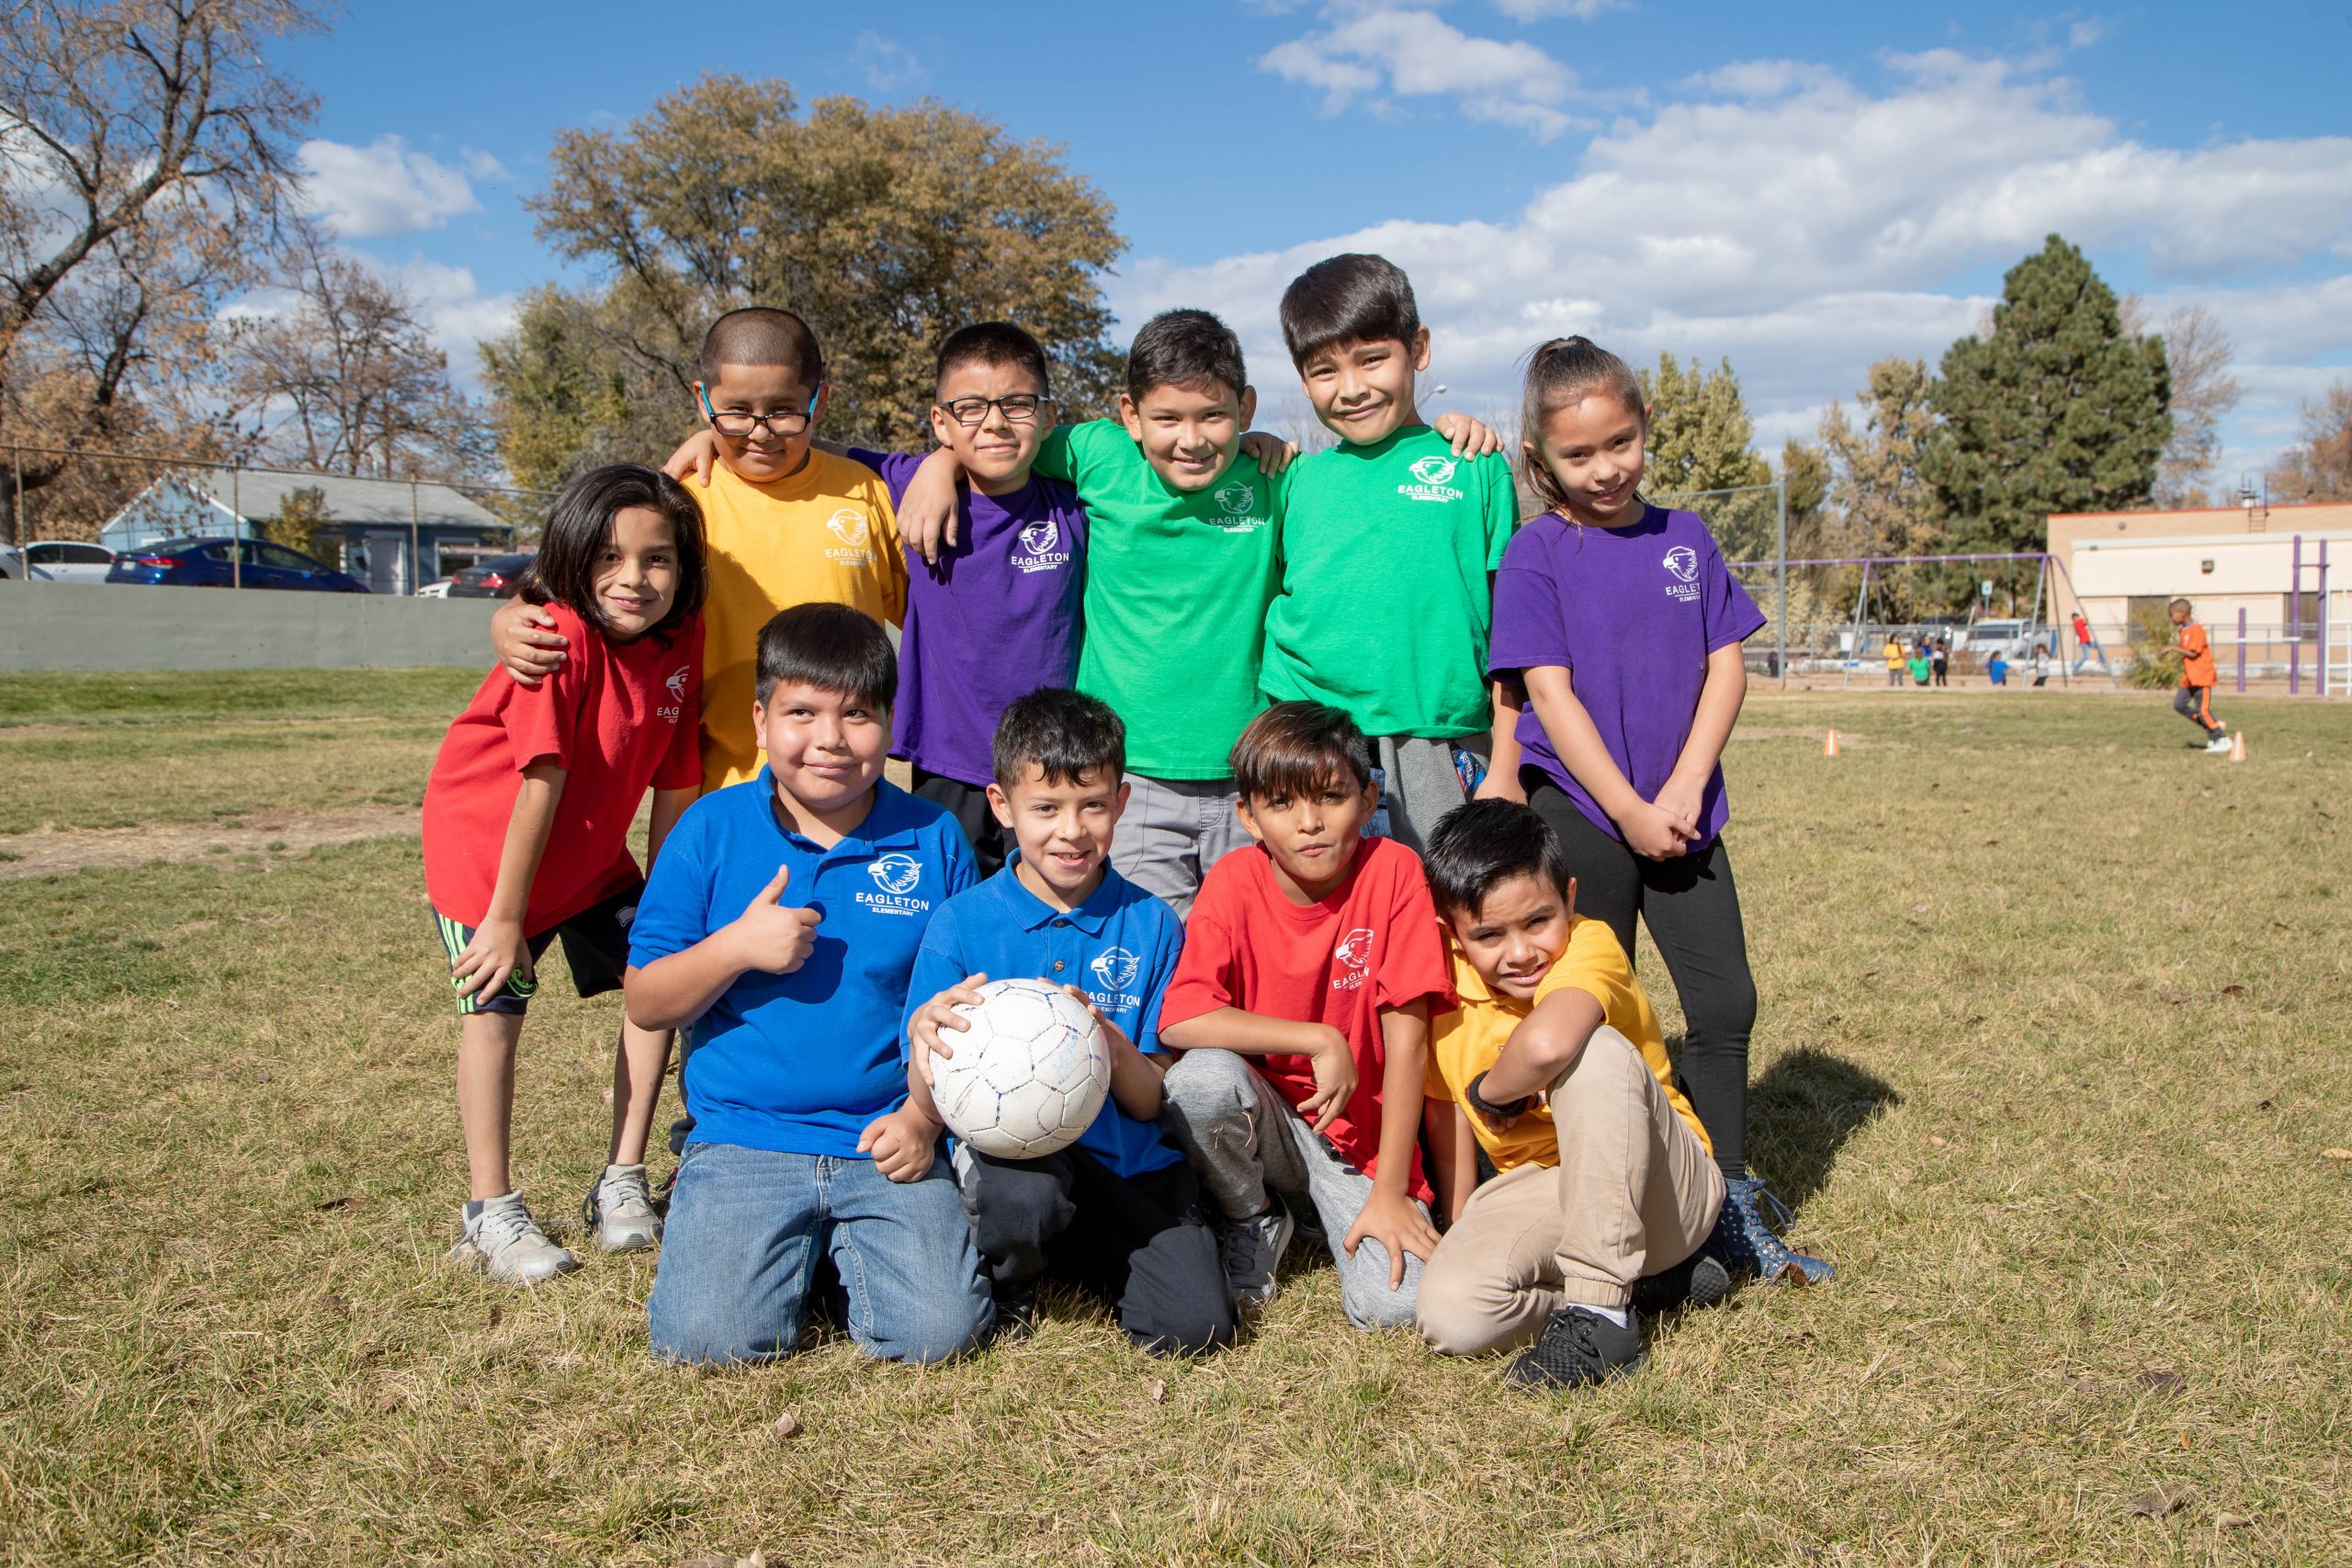 Group of kids posing for photo holding a soccer ball